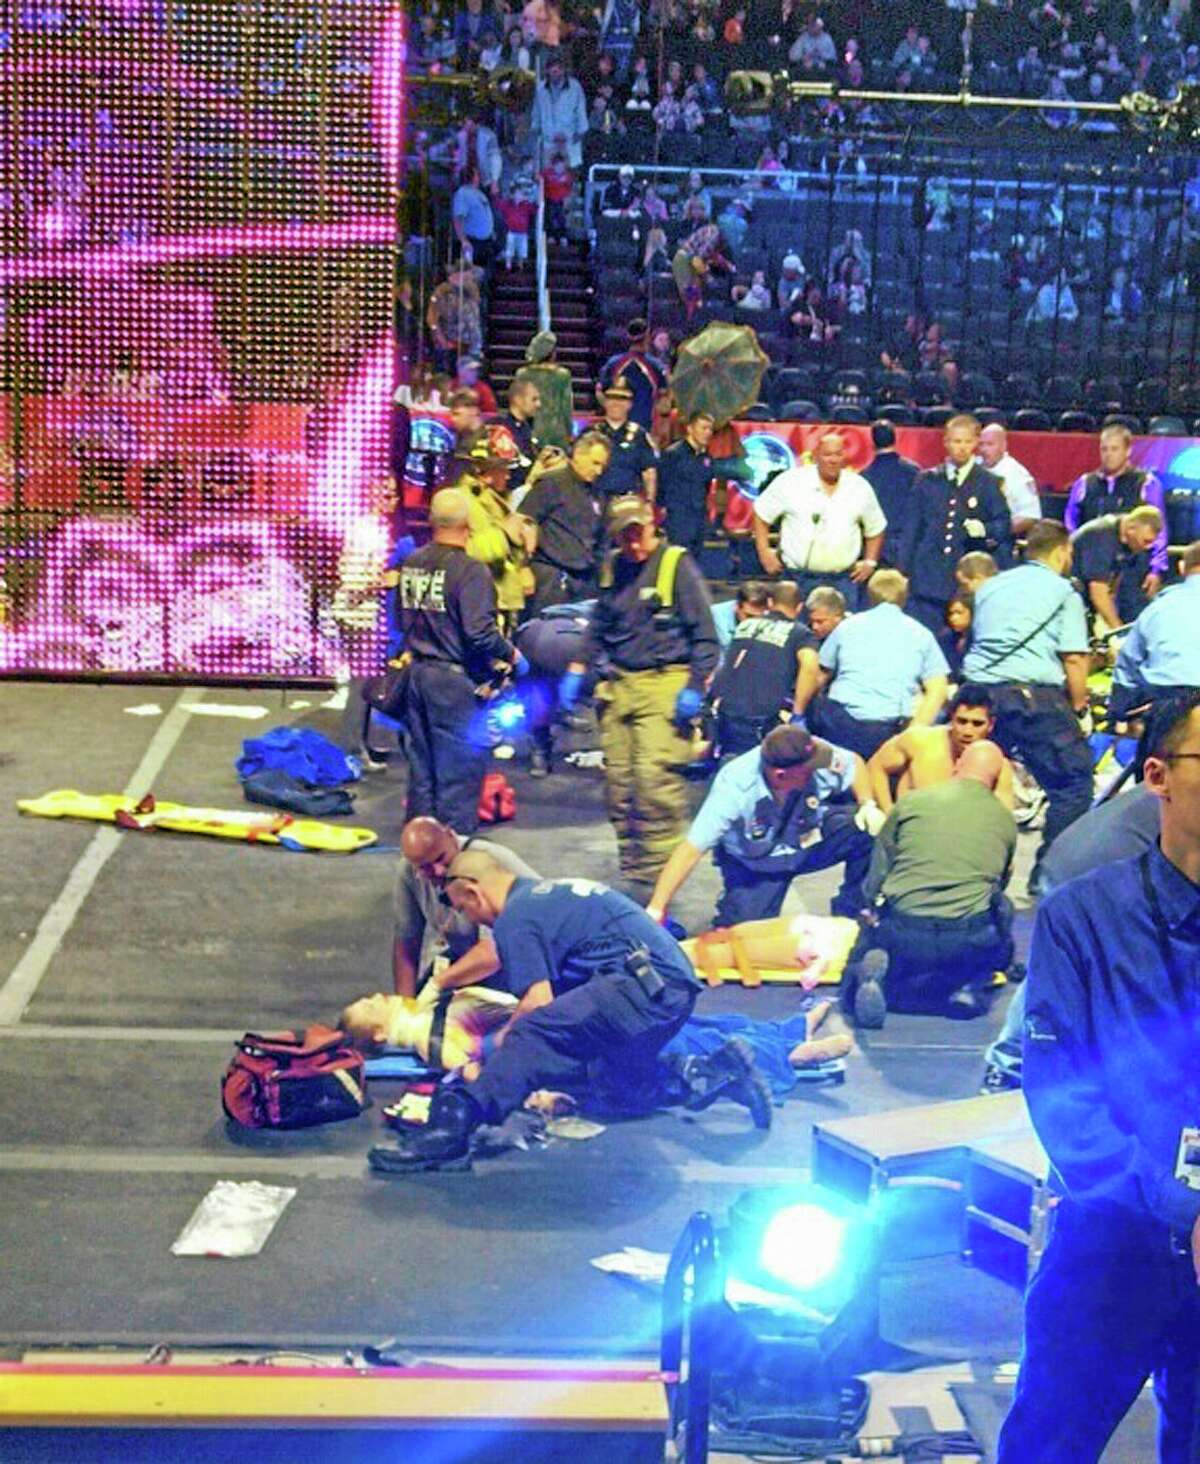 In this photo provided by Rosa Viveiros, first responders work at the center ring after a platform collapsed during an aerial hair-hanging stunt at the Ringling Brothers and Barnum and Bailey Circus, Sunday, May 4, 2014, in Providence, R.I. At least nine performers were seriously injured in the fall, including a dancer below, while an unknown number of others suffered minor injuries. (AP Photo/Rosa Viveiros) MANDATORY CREDIT